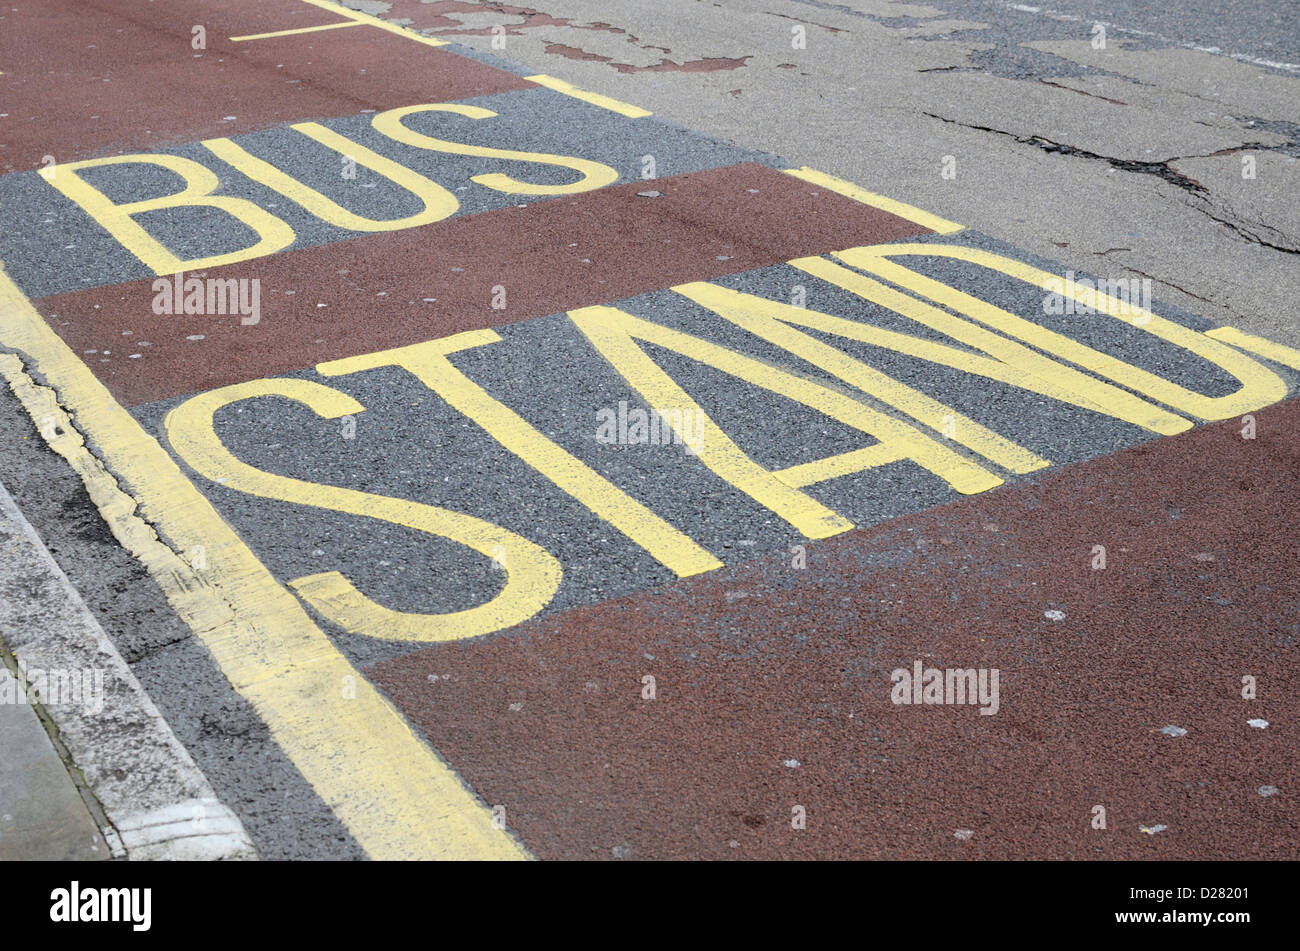 Bus stand painted road markings, London, UK Stock Photo